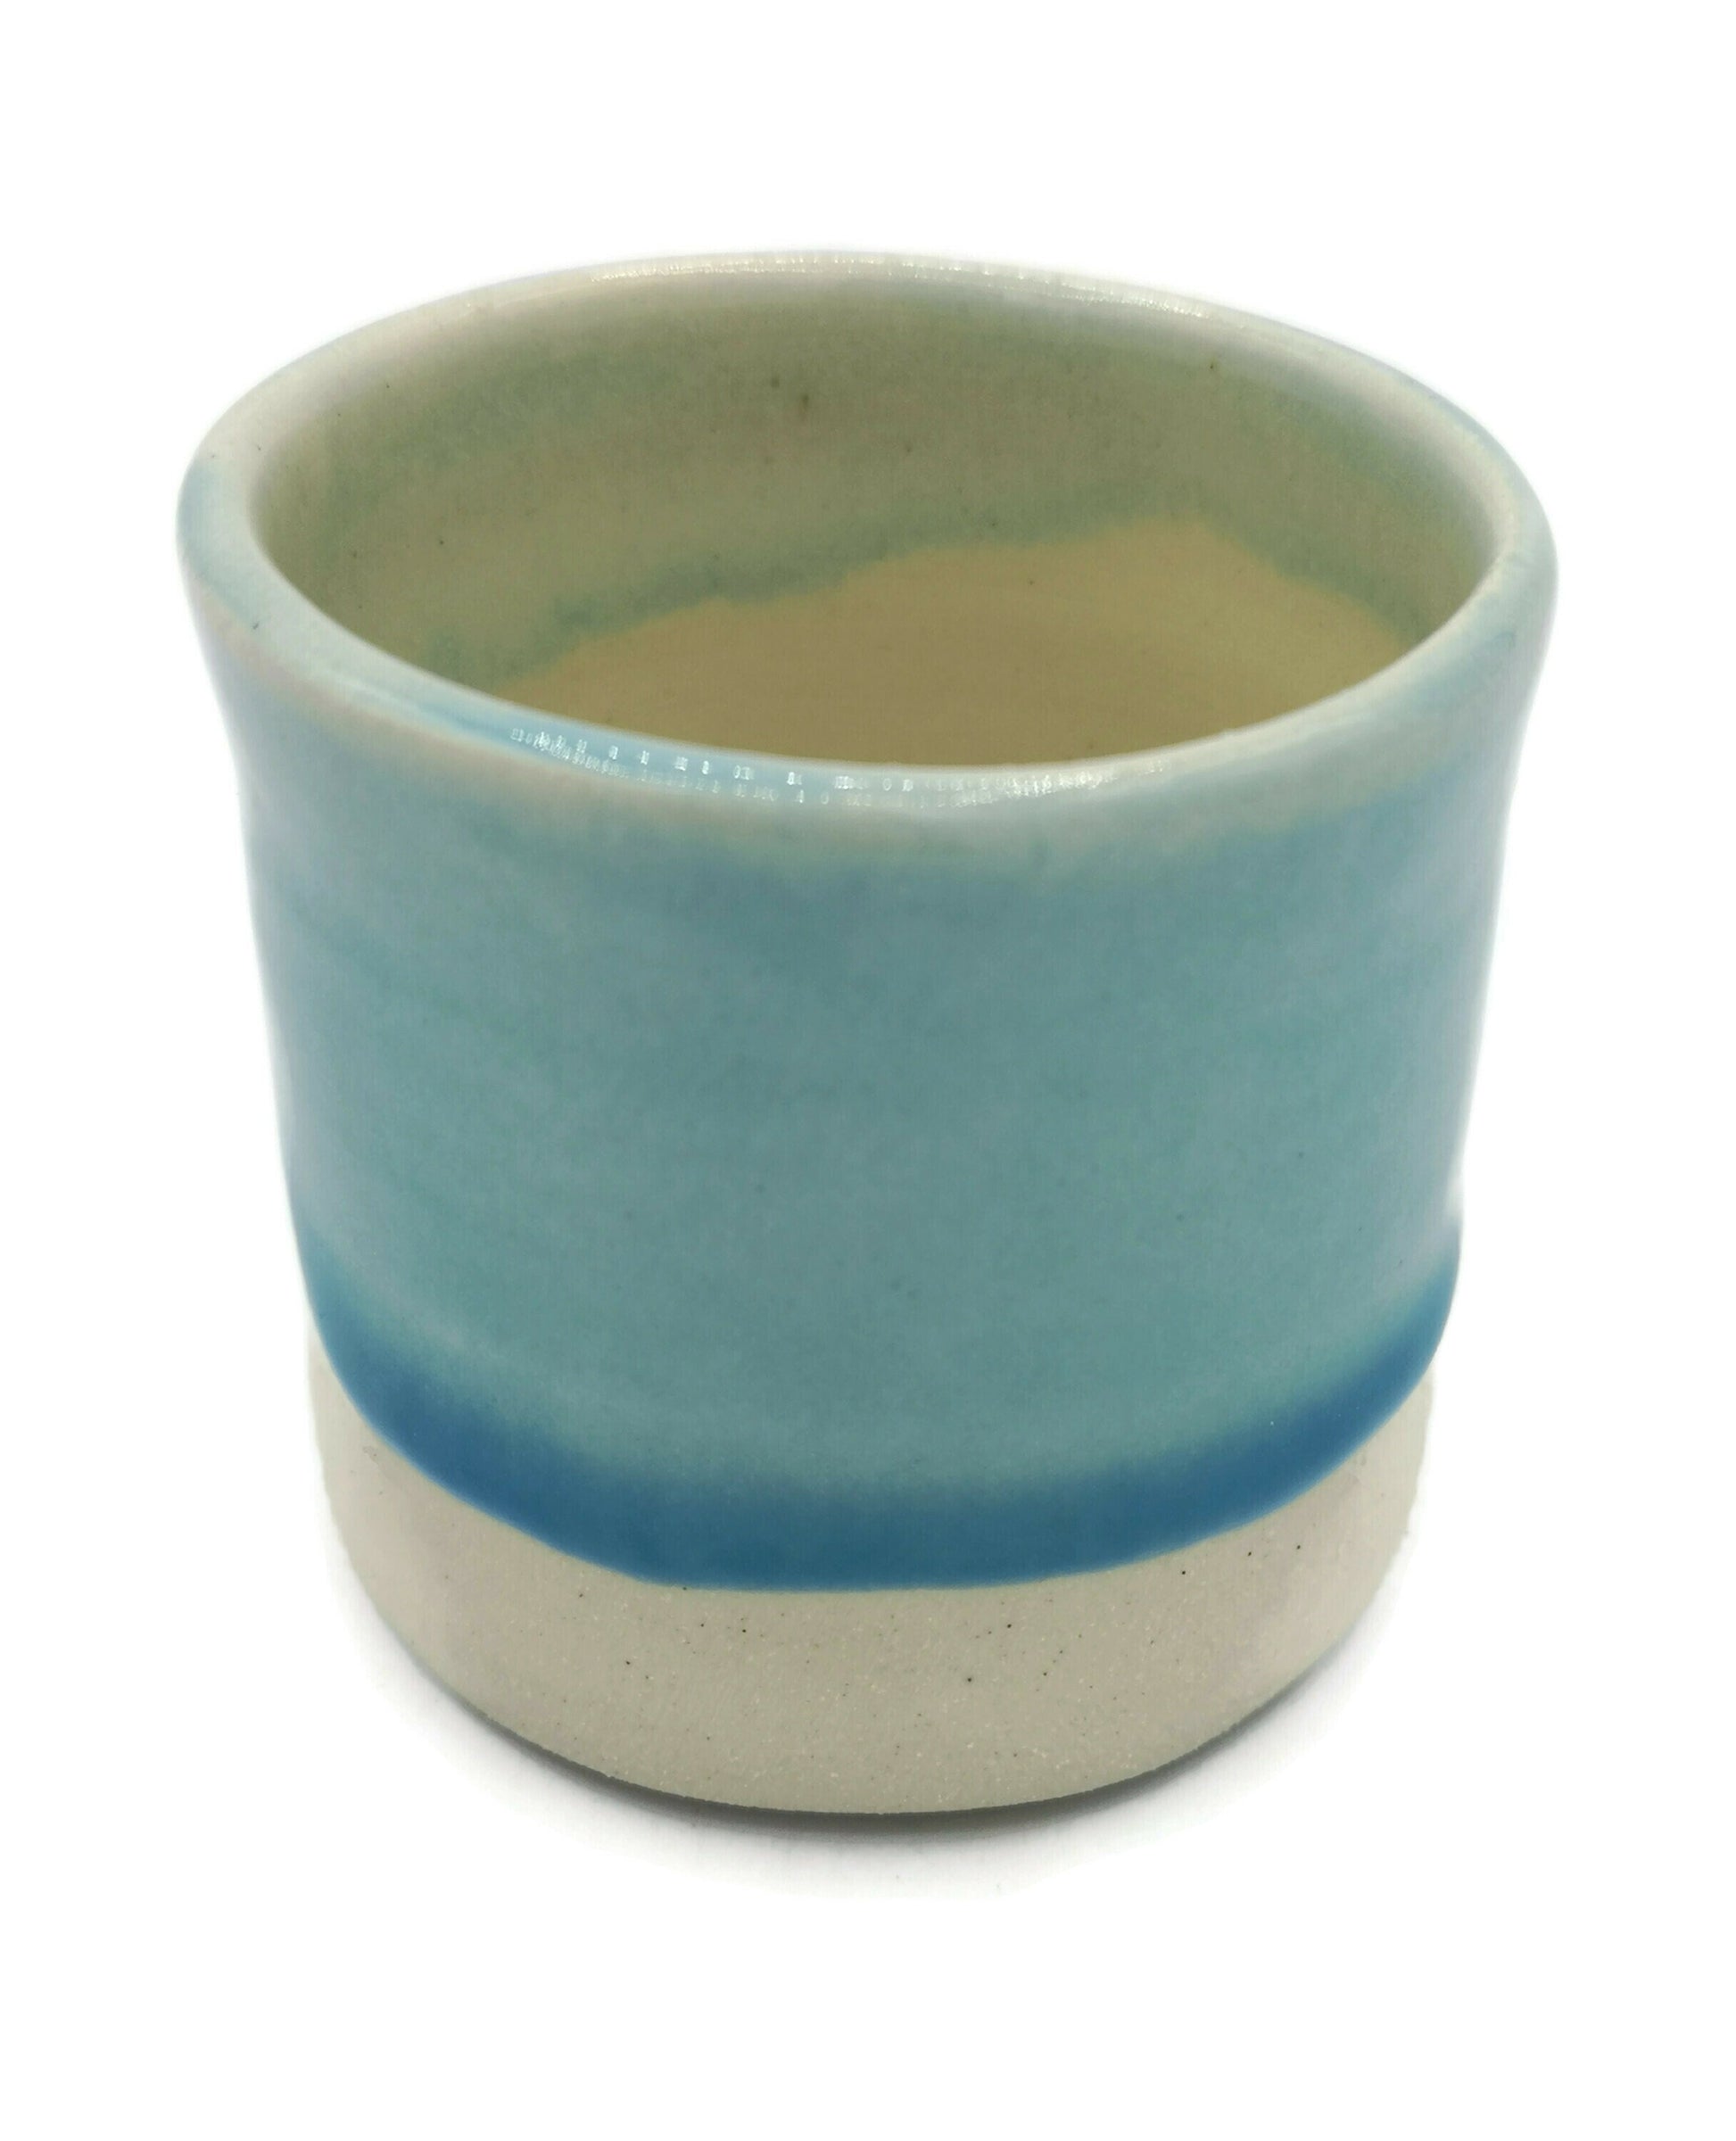 Handmade Ceramic Espresso Cup, Turquoise Blue Stoneware Mug Without Handle, Dishwasher Safe Coffee Cup And Saucer, Unique Best Gifts For Him - Ceramica Ana Rafael